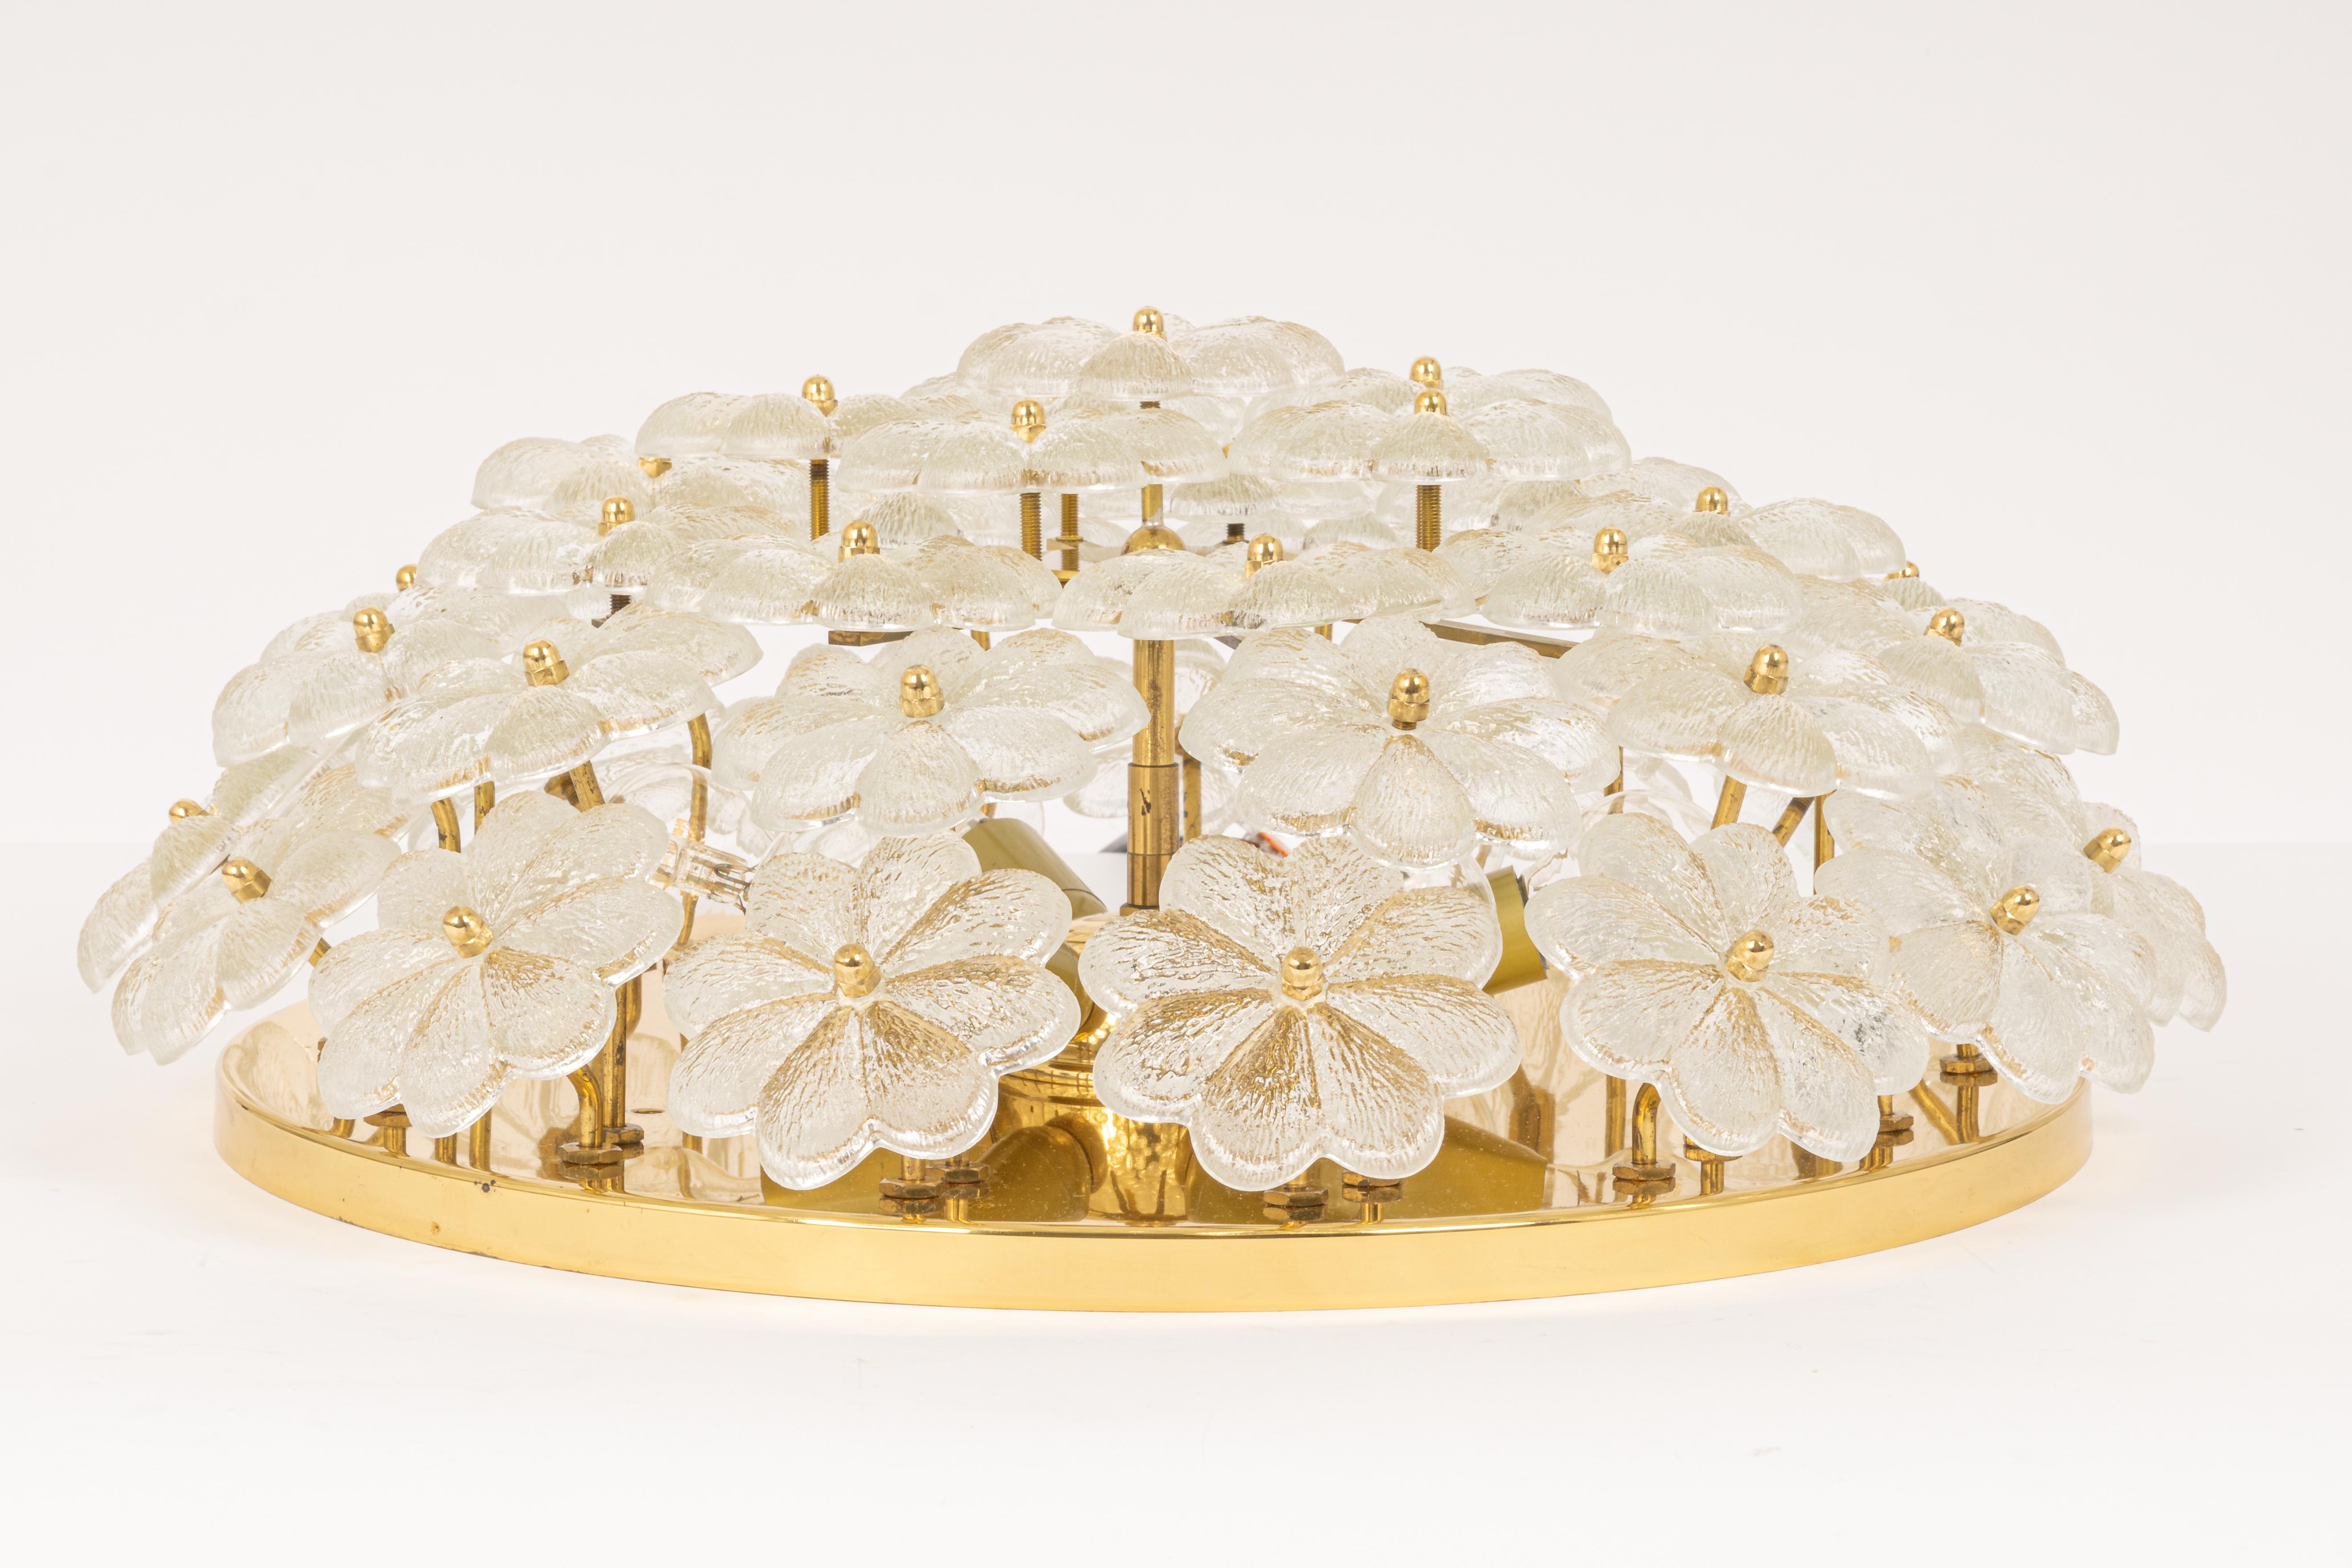 Midcentury flush mount light or sconce with 42 Murano glass flowers over a polished brass base, made by Ernst Palme in Germany in, 1970s.

High quality and in very good condition. Cleaned, well-wired and ready to use. 

The fixture requires 6 x E14